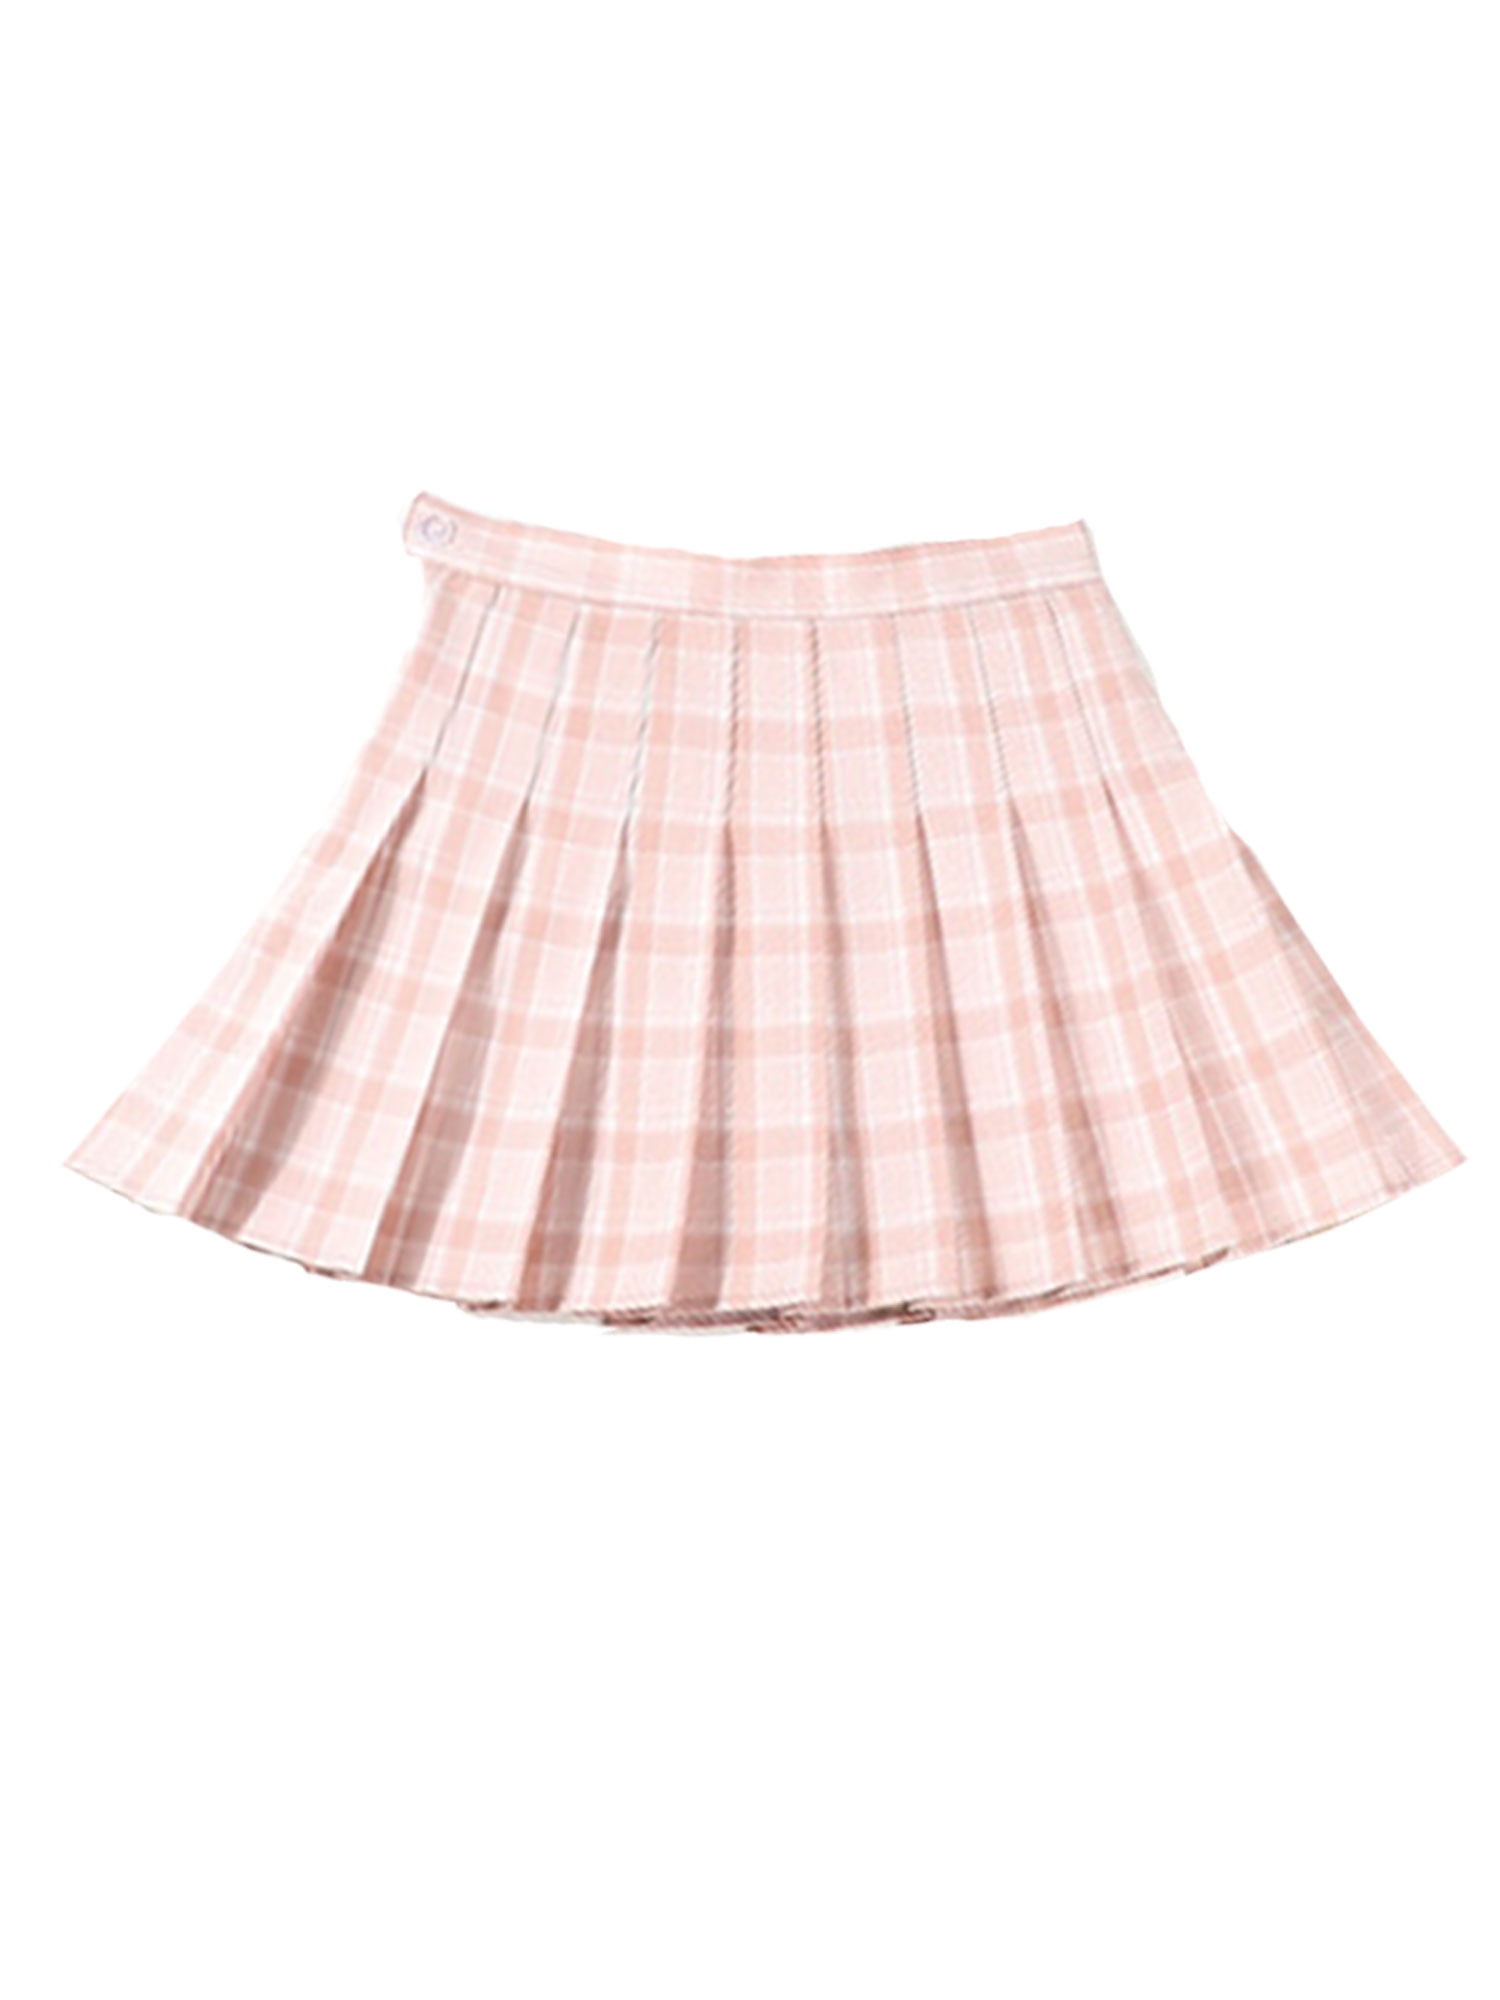 Womens Pleated Plaid Skirts High Waisted Skater Tennis School A-Line Skirt with Shorts